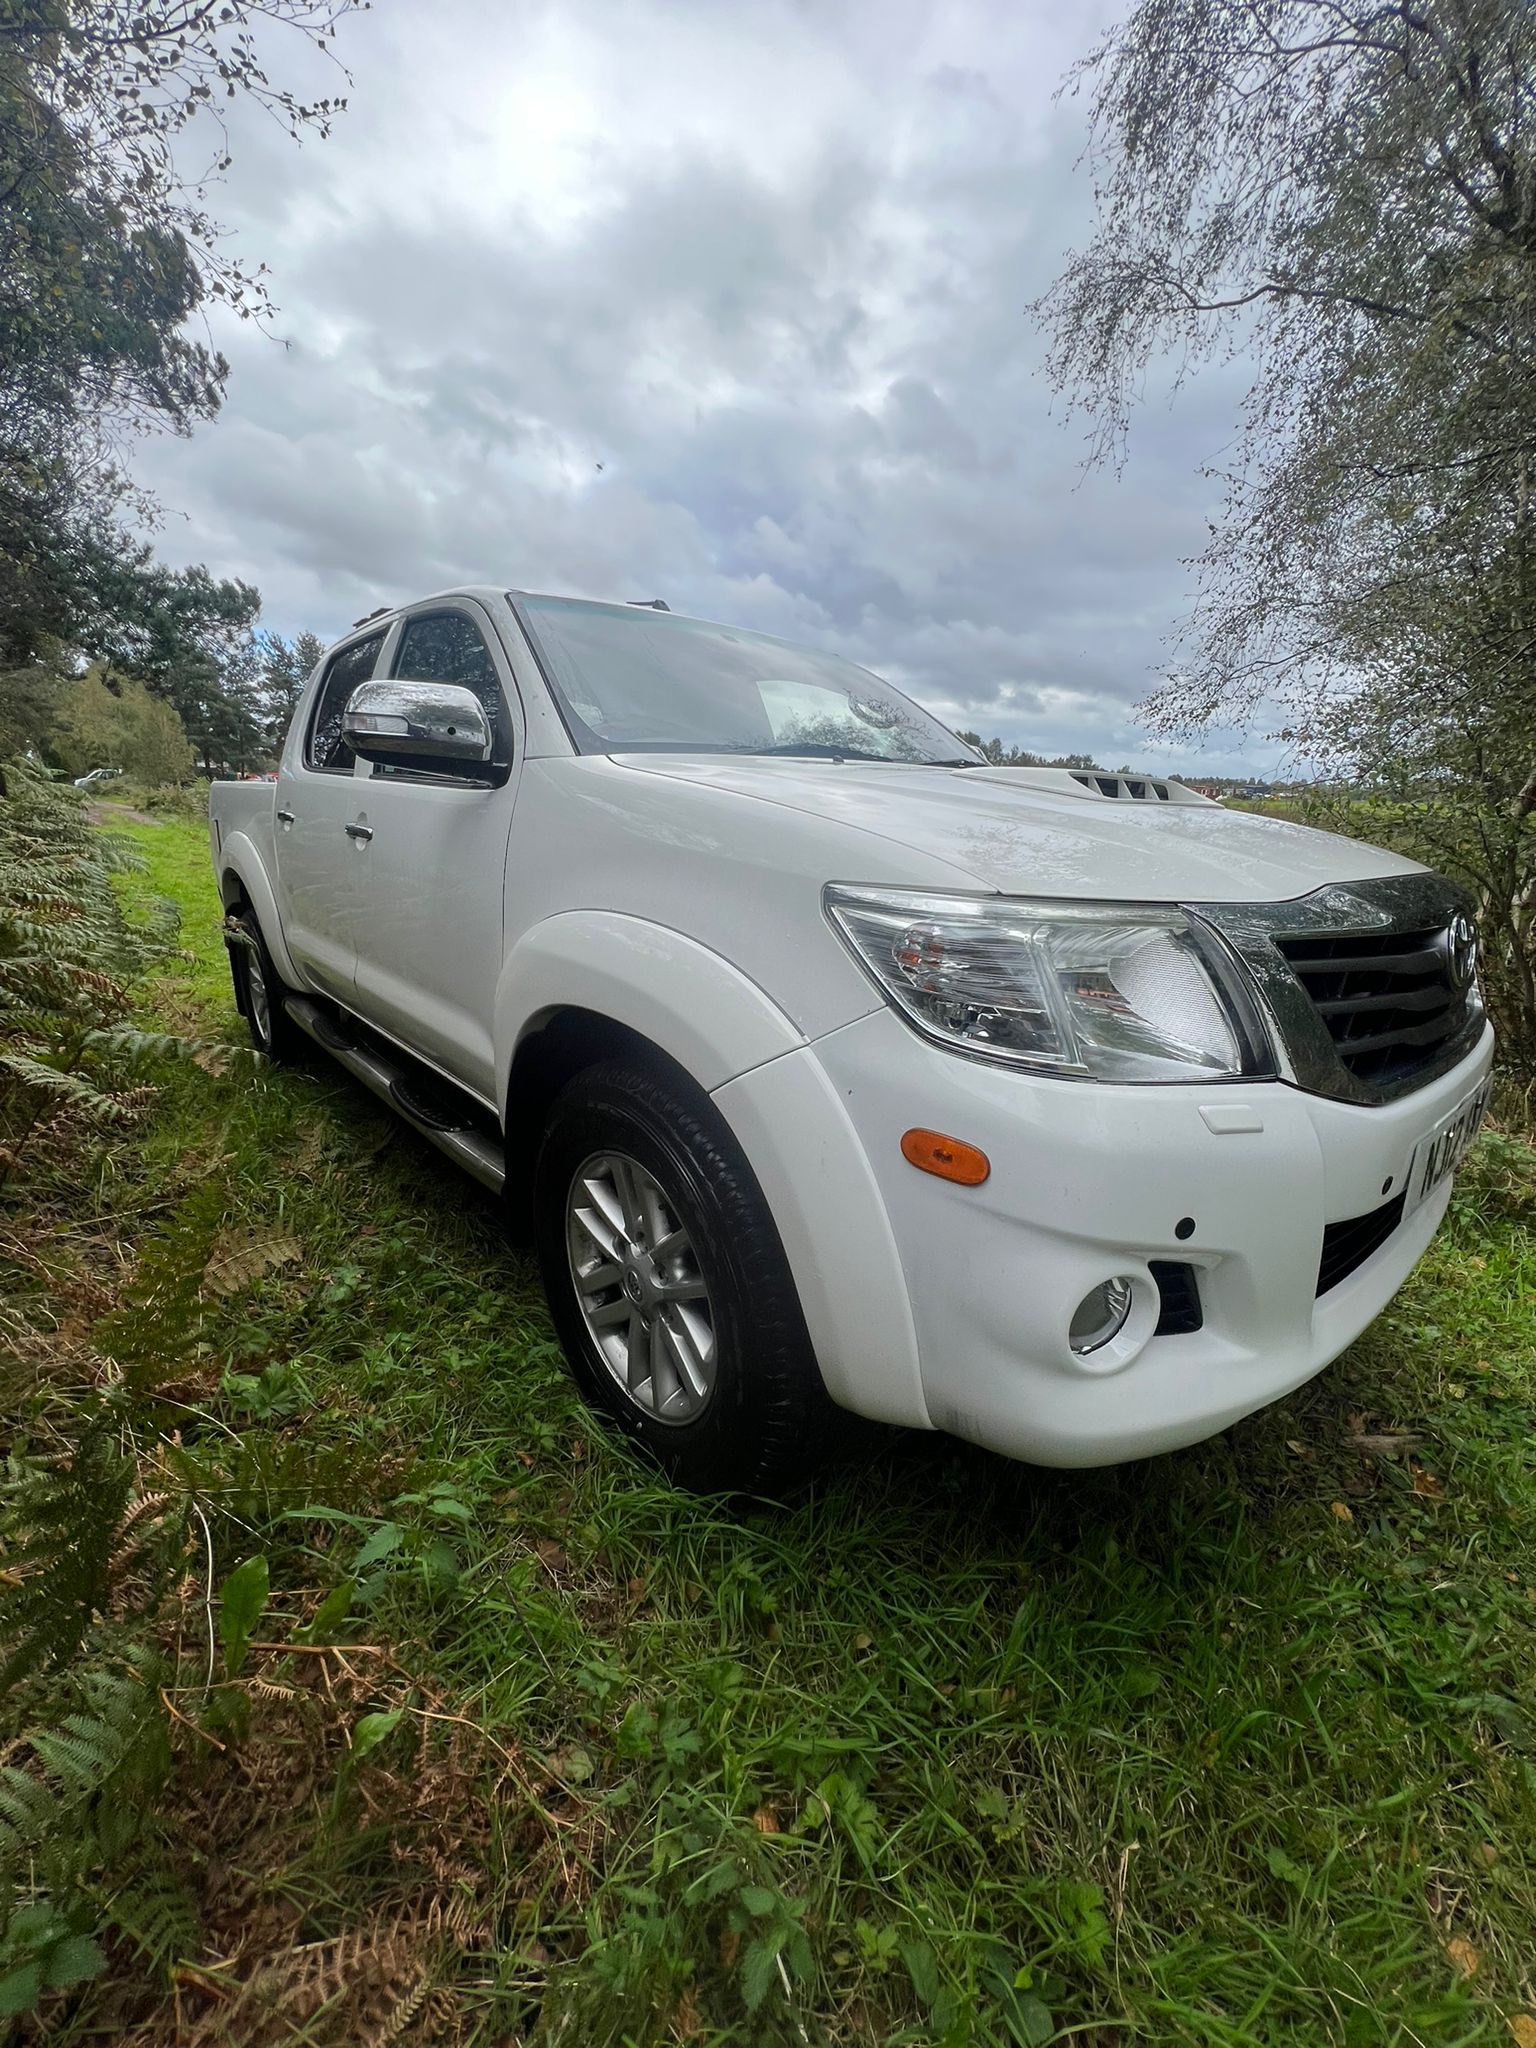 Bid on **ONLY 58K MILES ** 2012 TOYOTA HILUX 3.0 AUTOMATIC- Buy &amp; Sell on Auction with EAMA Group